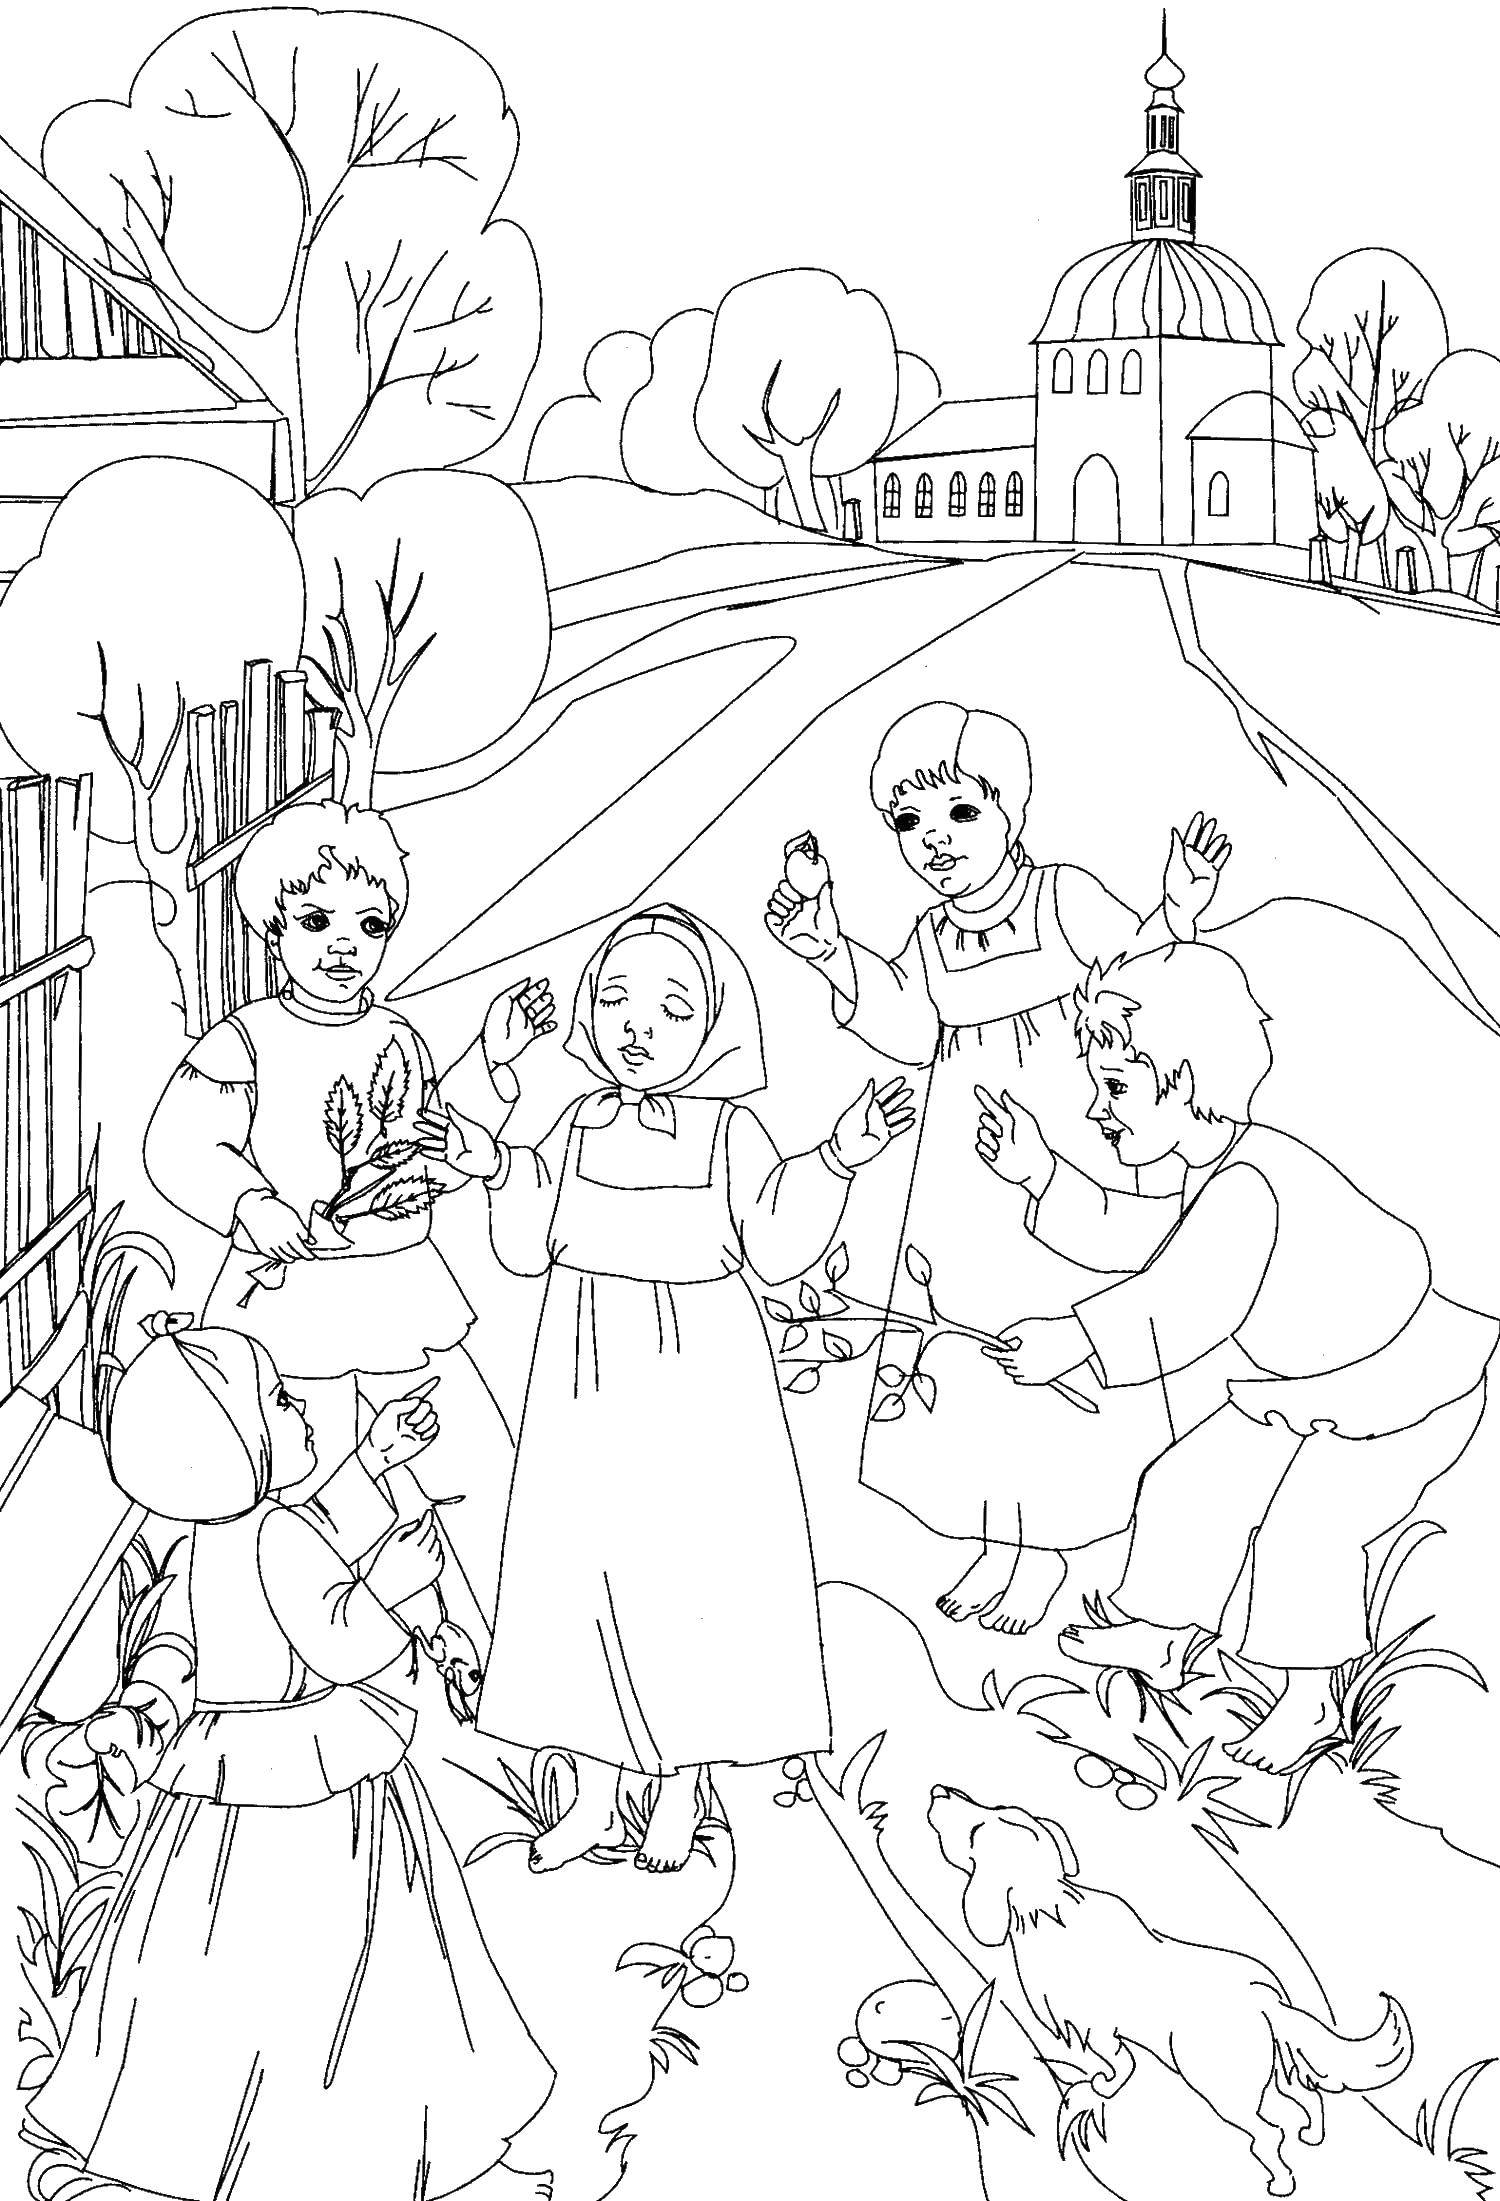 Coloring Russian village. Category The village. Tags:  Village, house, animals.